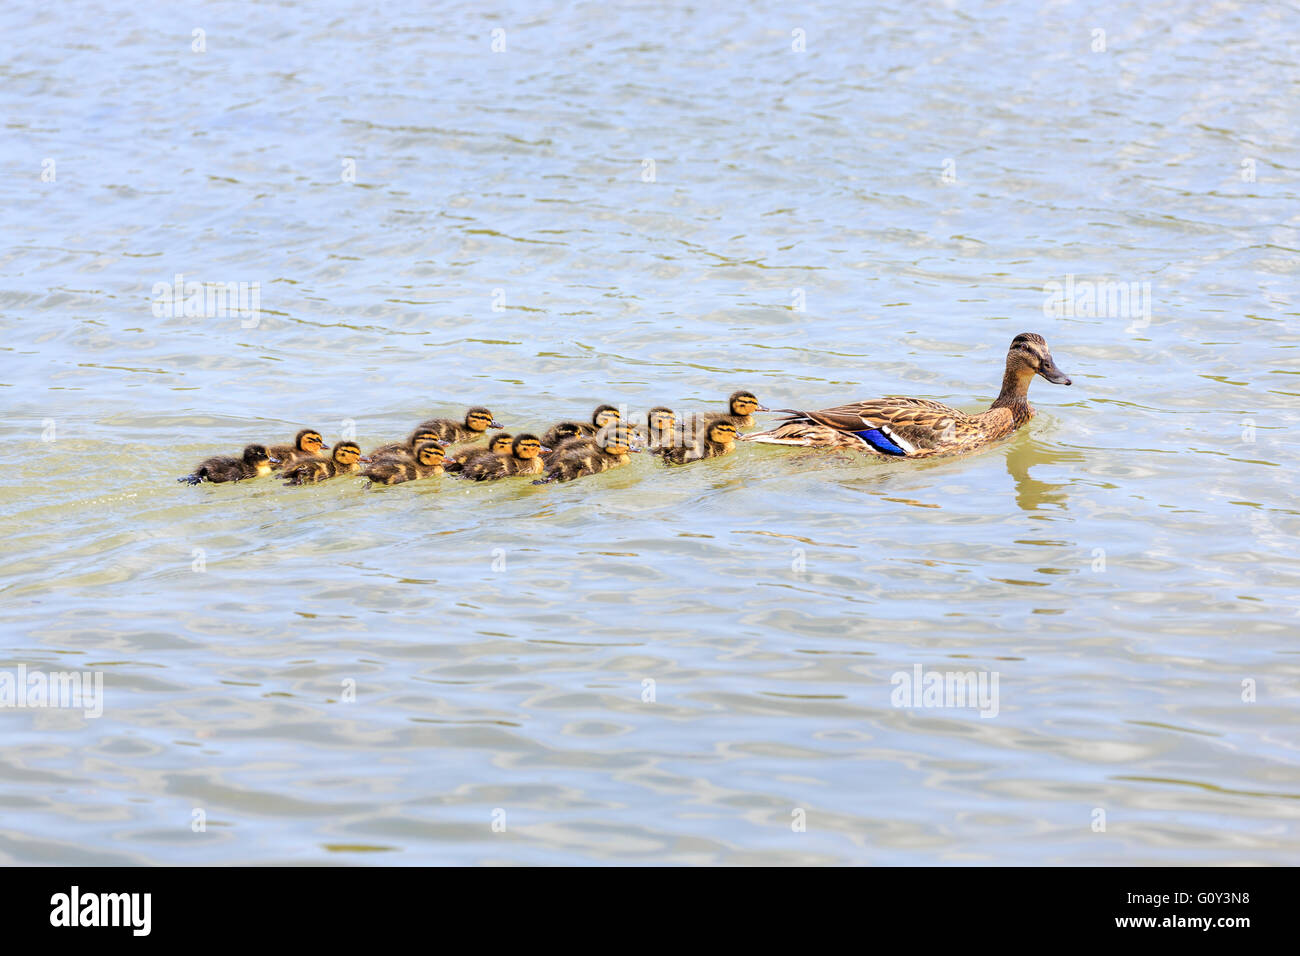 Family of mother mallard (Anas platyrhynchos) and ducklings swimming, Wildfowl & Wetlands Trust, Arundel, West Sussex, UK Stock Photo